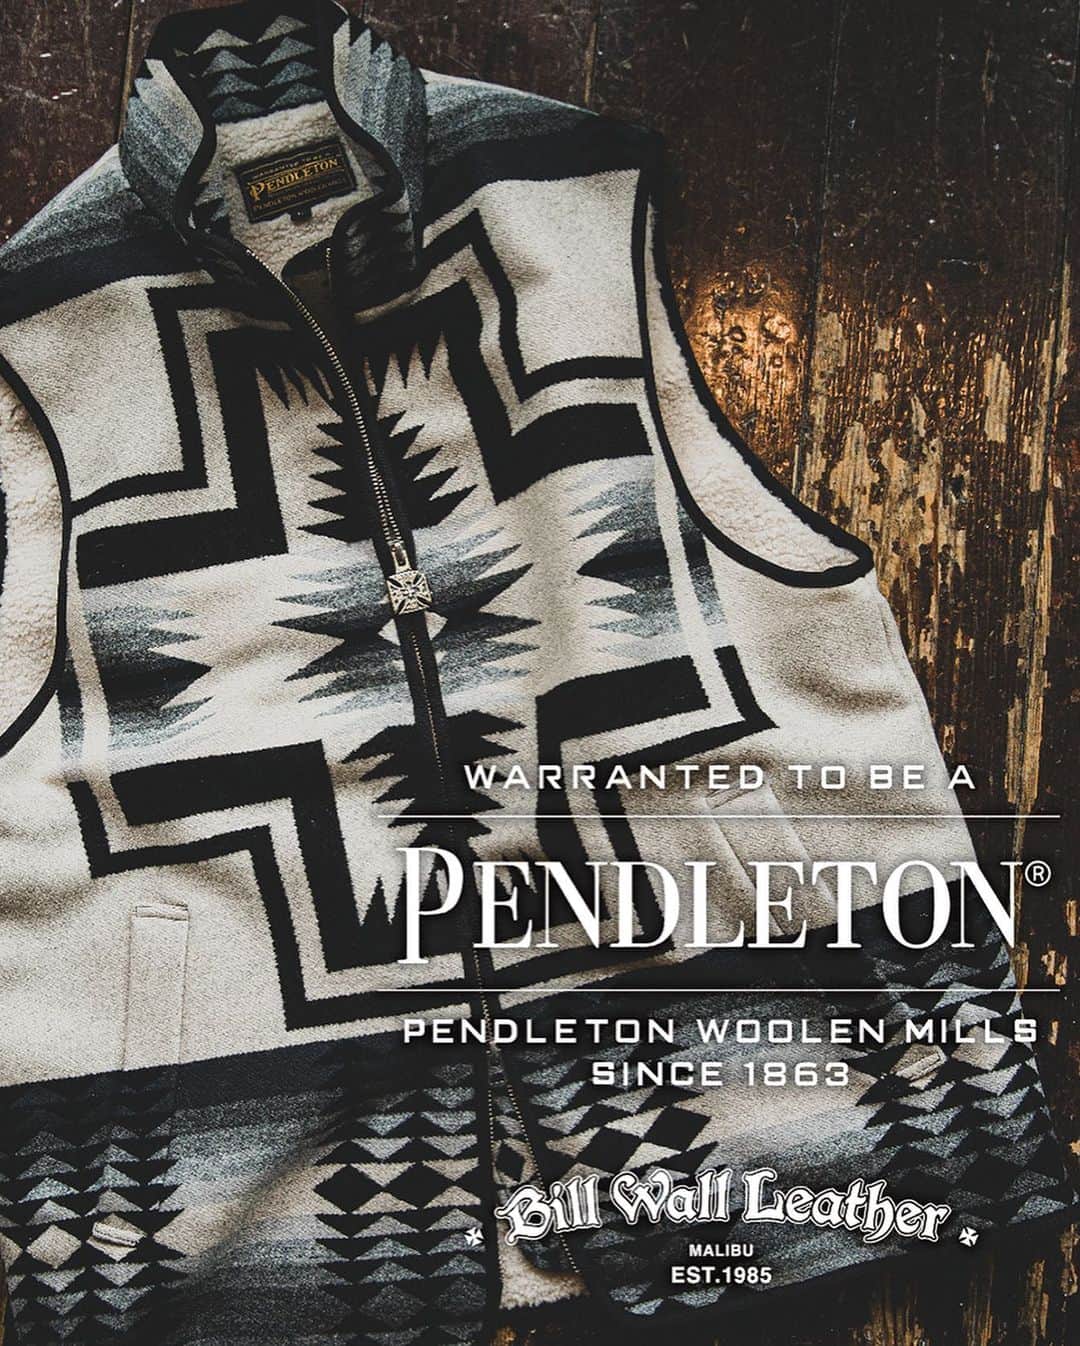 Bill Wall Leather × BEAMSさんのインスタグラム写真 - (Bill Wall Leather × BEAMSInstagram)「【Special Collaboration】PENDLETON × Bill Wall Leather　9.22（Fri）Release  We will be releasing the 4th collaboration item between the jewelry brand〈Bill Wall Leather〉, born in Malibu, California, in 1985, and the long-established woolen wear/blanket brand〈PENDLETON〉, founded in Oregon, USA, in 1863! This collaboration includes staple items, open-collar shirts, and fully customized boa vests made from design patterns. Buttons used for the item and some zipper pulls use silver parts for the collaboration.〈Bill Wall Leather〉designers proposed the vest designs and selected the colors of the open-collar shirts and the vests. HARDING, which is a pattern that represents the brand, was incorporated into the vest to celebrate the 100th anniversary. It is a design that can be worn in outdoor situations, but it is also a design that is useful for town use because of its monotone-based color. Placing a boa on the inside makes it highly cold-resistant, and it can be worn over many seasons. Also, all items especially feature the name tags of both brands. They are special items that incorporate the skills of the jewelry brand powerhouse, Bill Wall Leather, into a long-beloved item from a long-established brand. Please look forward to it!  ・BEAMS NEWS ⇨ https://www.beams.co.jp/news/3698/ __________   【Special Collaboration】PENDLETON × Bill Wall Leather　9.22（金）リリース  1985年カリフォルニア・マリブにて誕生したジュエリーブランド〈Bill Wall Leather〉と、1863年アメリカ・オレゴンにて創業した老舗ウールウエア・ブランケットブランド〈PENDLETON〉のコラボレーションアイテムの第4弾をリリースします！ 今回は、本コラボレーションでは定番アイテムとなったオープンカラーシャツに加え、型から完全別注で製作したボアベストが登場します。 アイテムに使用するボタンの一部や引き手には、コラボレーション用に製作したシルバーパーツを採用。ベストのデザイン提案に加え、オープンカラーシャツ、ベスト共にカラー選定は〈Bill Wall Leather〉デザイナー自身が行いました。 ブランドを代表する柄である『HARDING』は今年で誕生100周年を迎えるということでベストに落とし込み、アウトドアシーンはもちろんのこと、モノトーンベースのカラーにすることでタウンユースとしても活躍するデザインに。裏側にボアを配すことで防寒性も高く長いシーズン着用できるアイテムです。また、全てのアイテムには両者のネームタグが付属する特別仕様。老舗ブランドの長年愛されているアイテムに、ジュエリーブランドの雄である〈Bill Wall Leather〉のギミックが加わったスペシャルアイテム。是非ご期待ください！   ・BEAMS NEWS ⇨ https://www.beams.co.jp/news/3698/  @pendleton_jp @billwallleather_beams @beams_official #pendleton #billwallleather #beams #silver #ペンドルトン #ビルウォールレザー #ビームス #シルバー」9月19日 16時04分 - billwallleather_beams